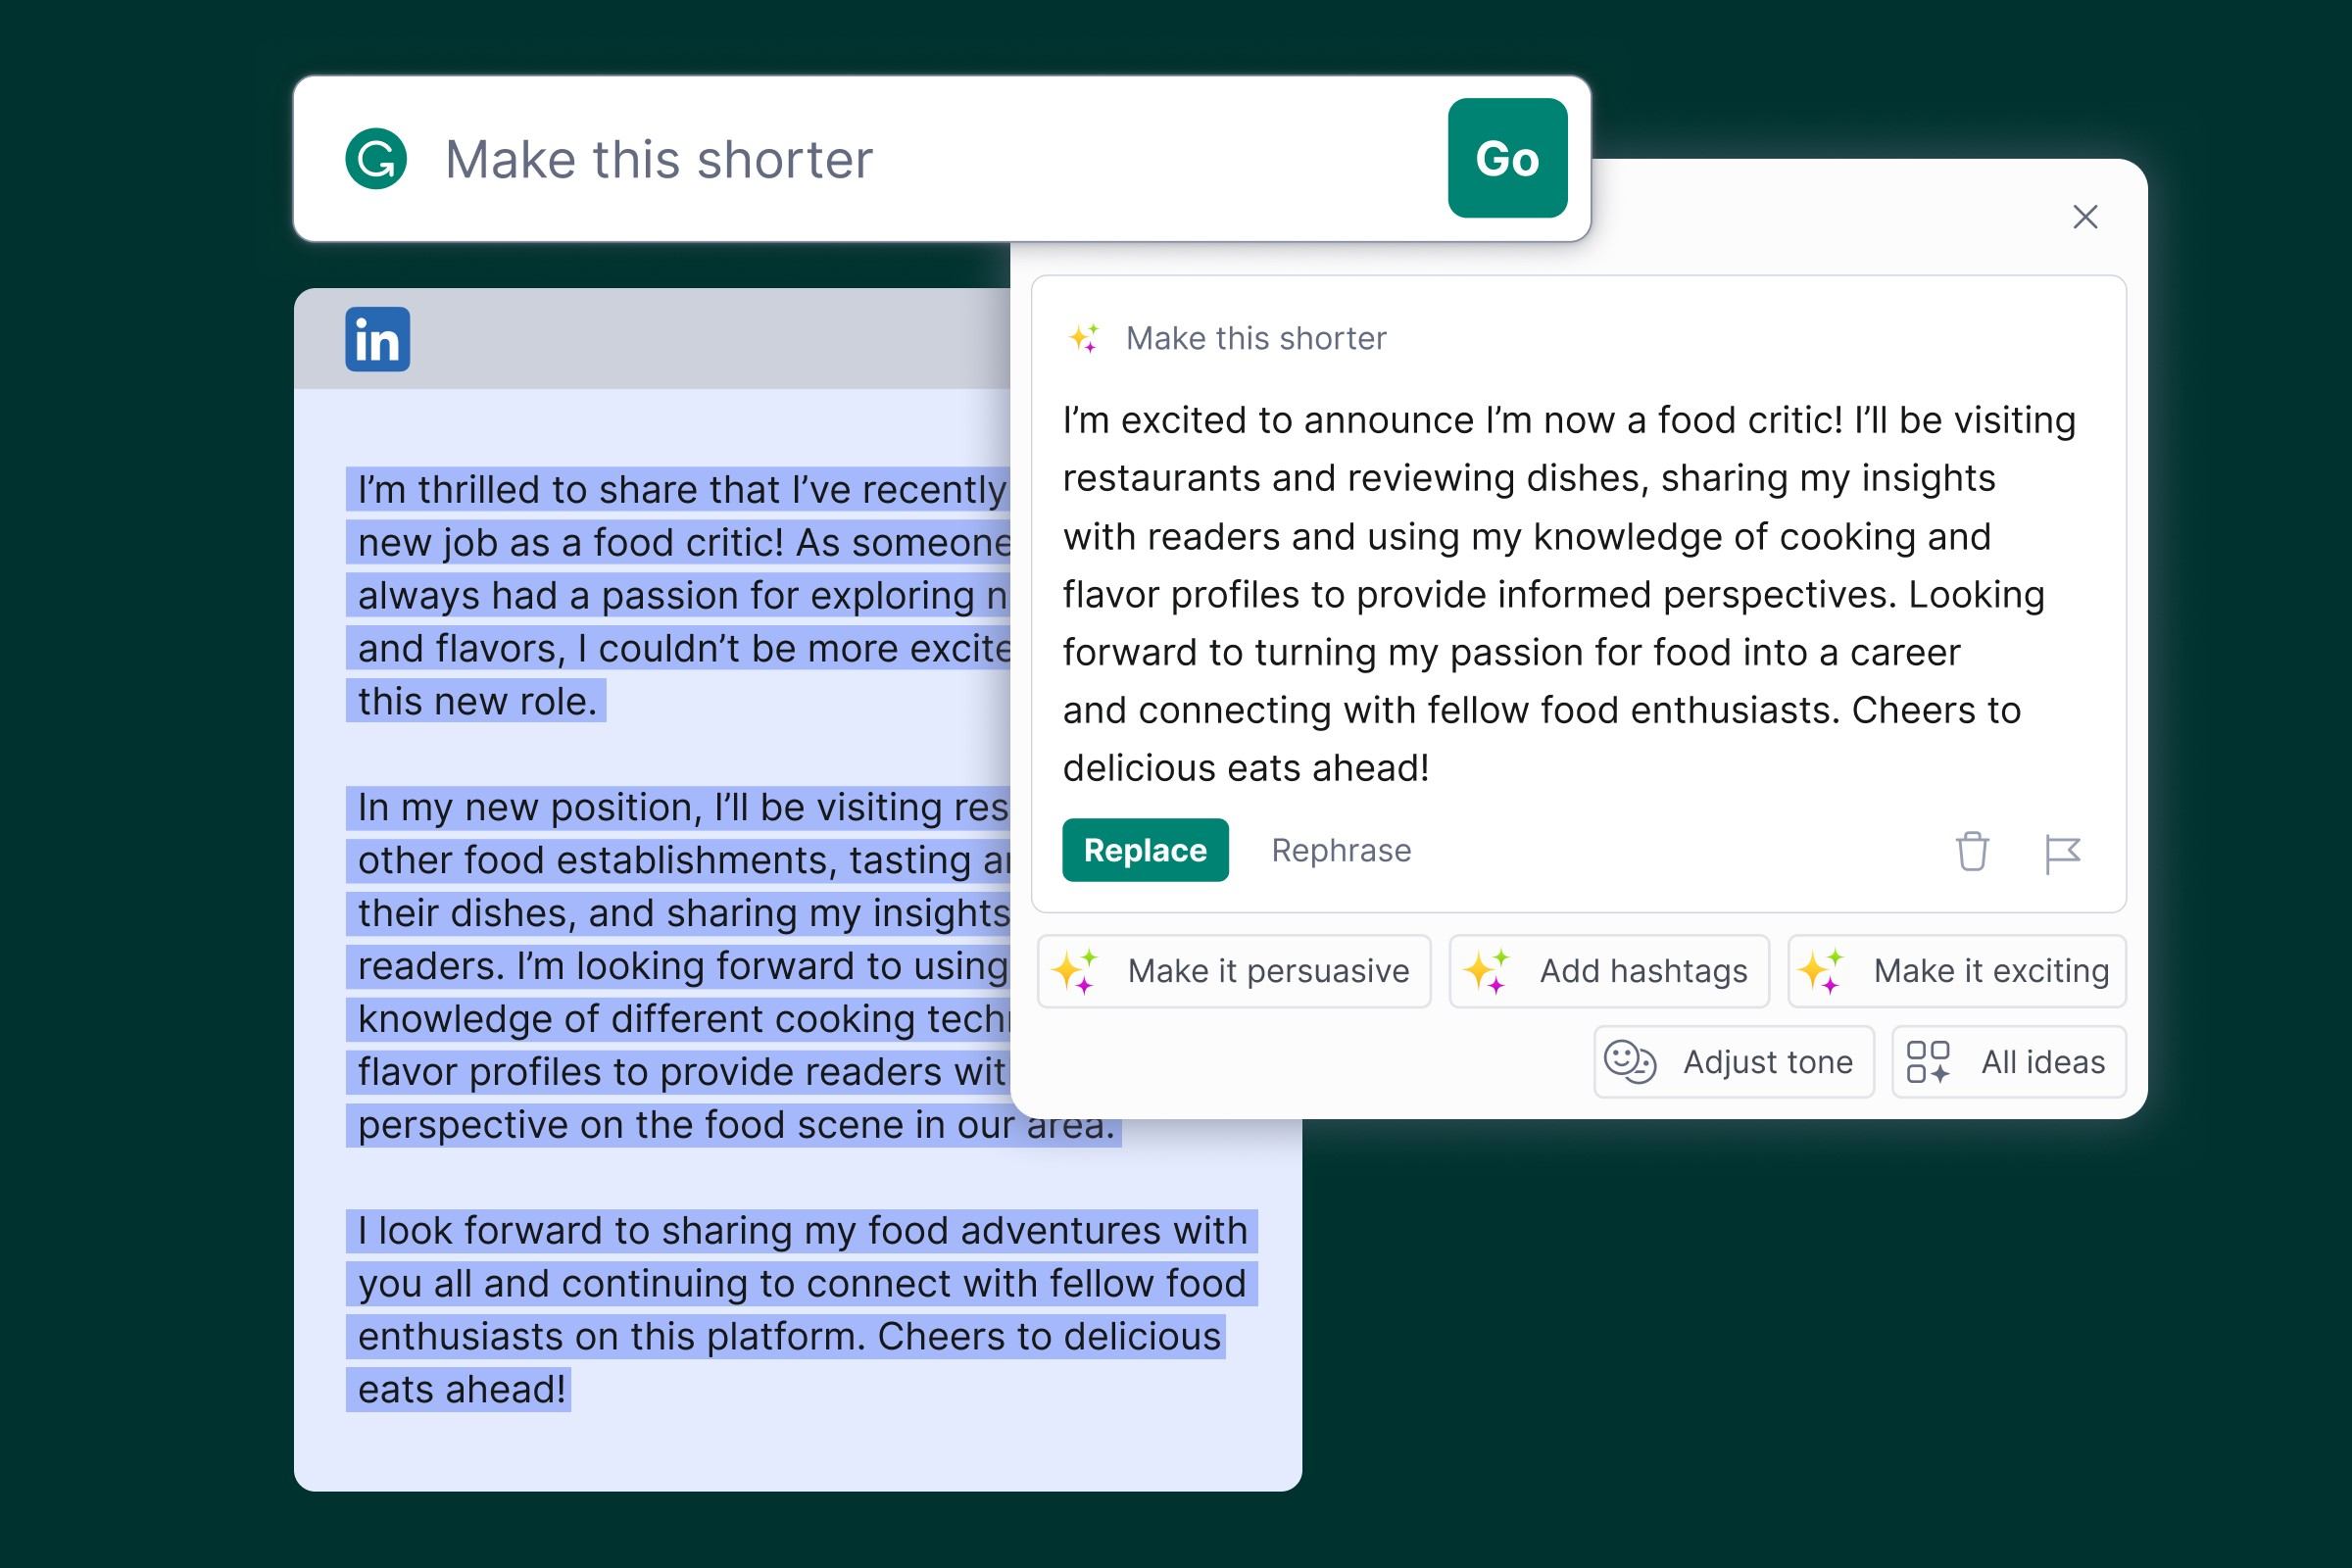 Grammarly’s New Feature Uses Generative AI To Personalize Writing Style